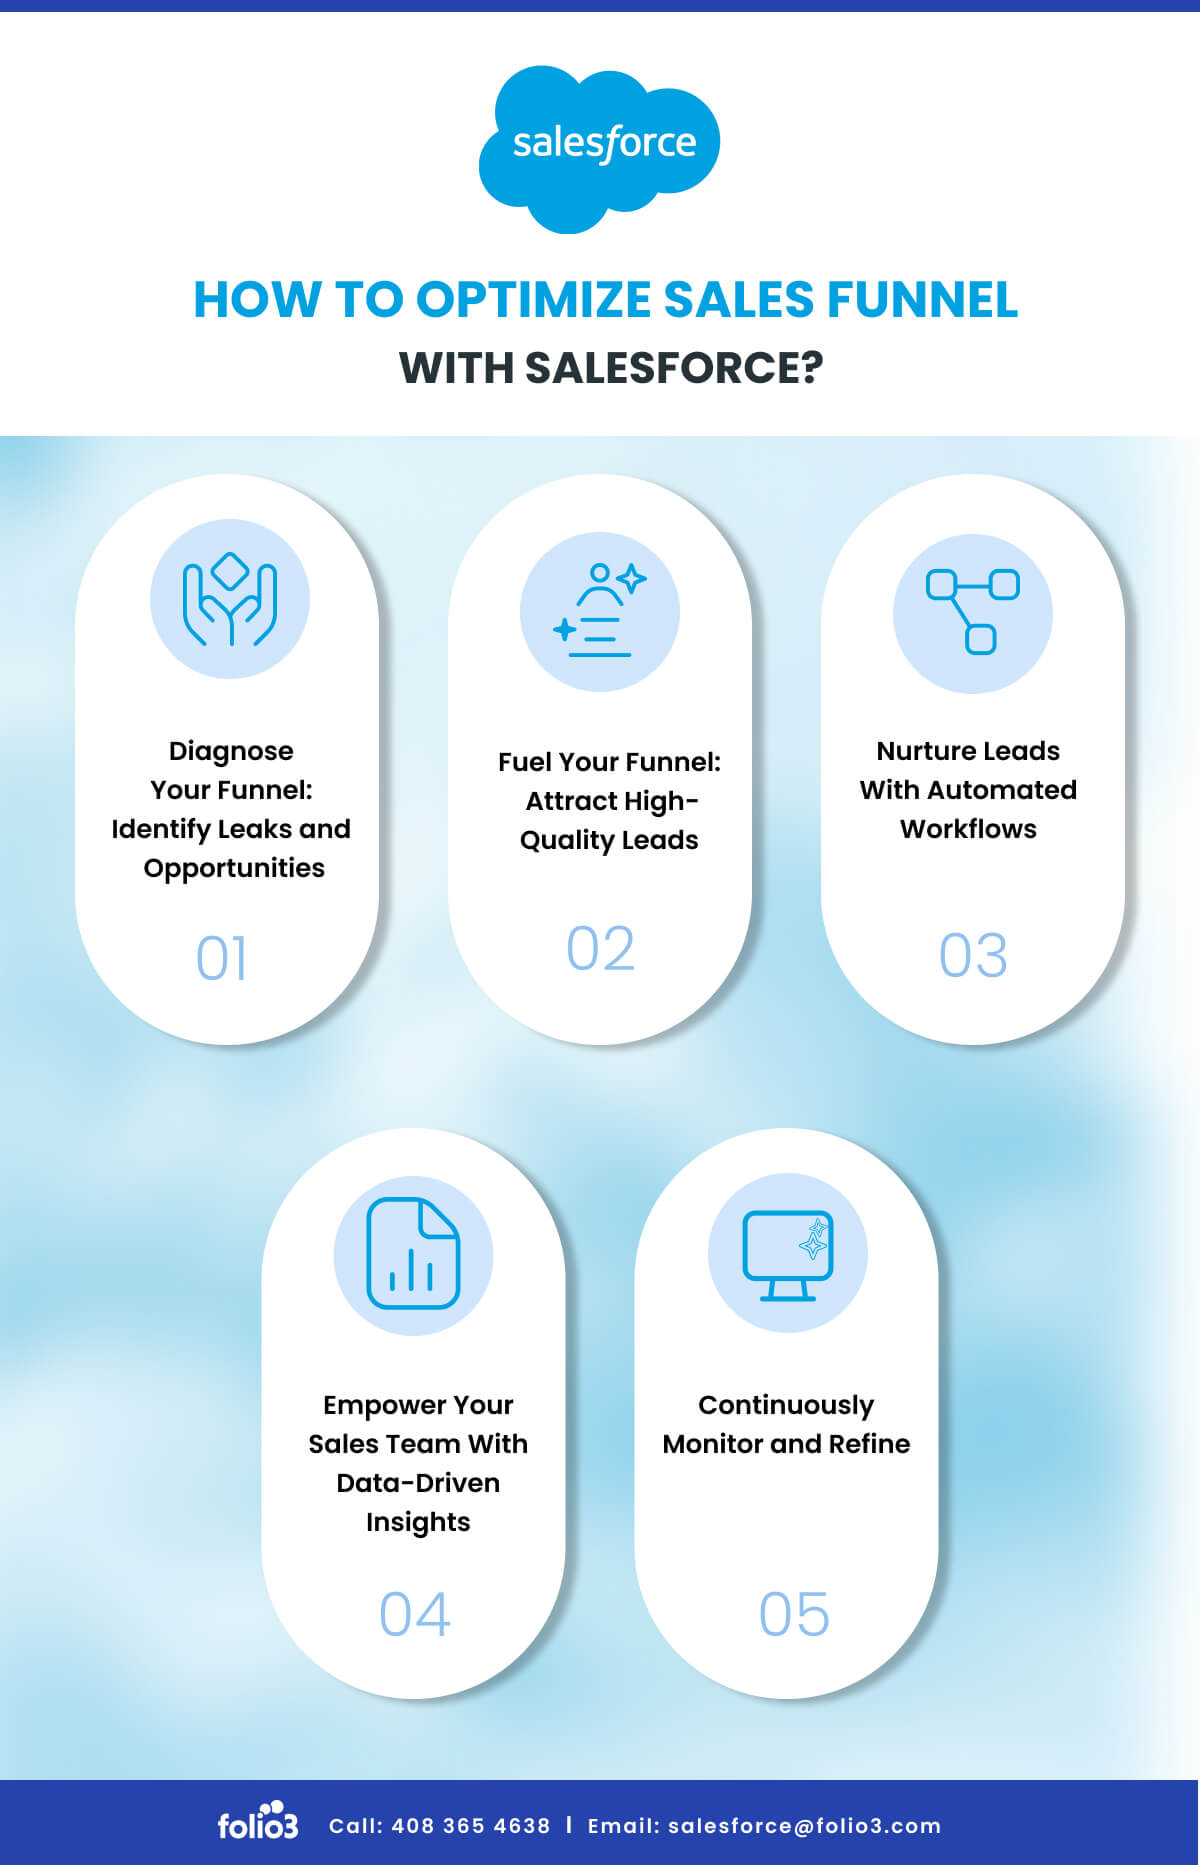 How to Optimize Sales Funnel With Salesforce